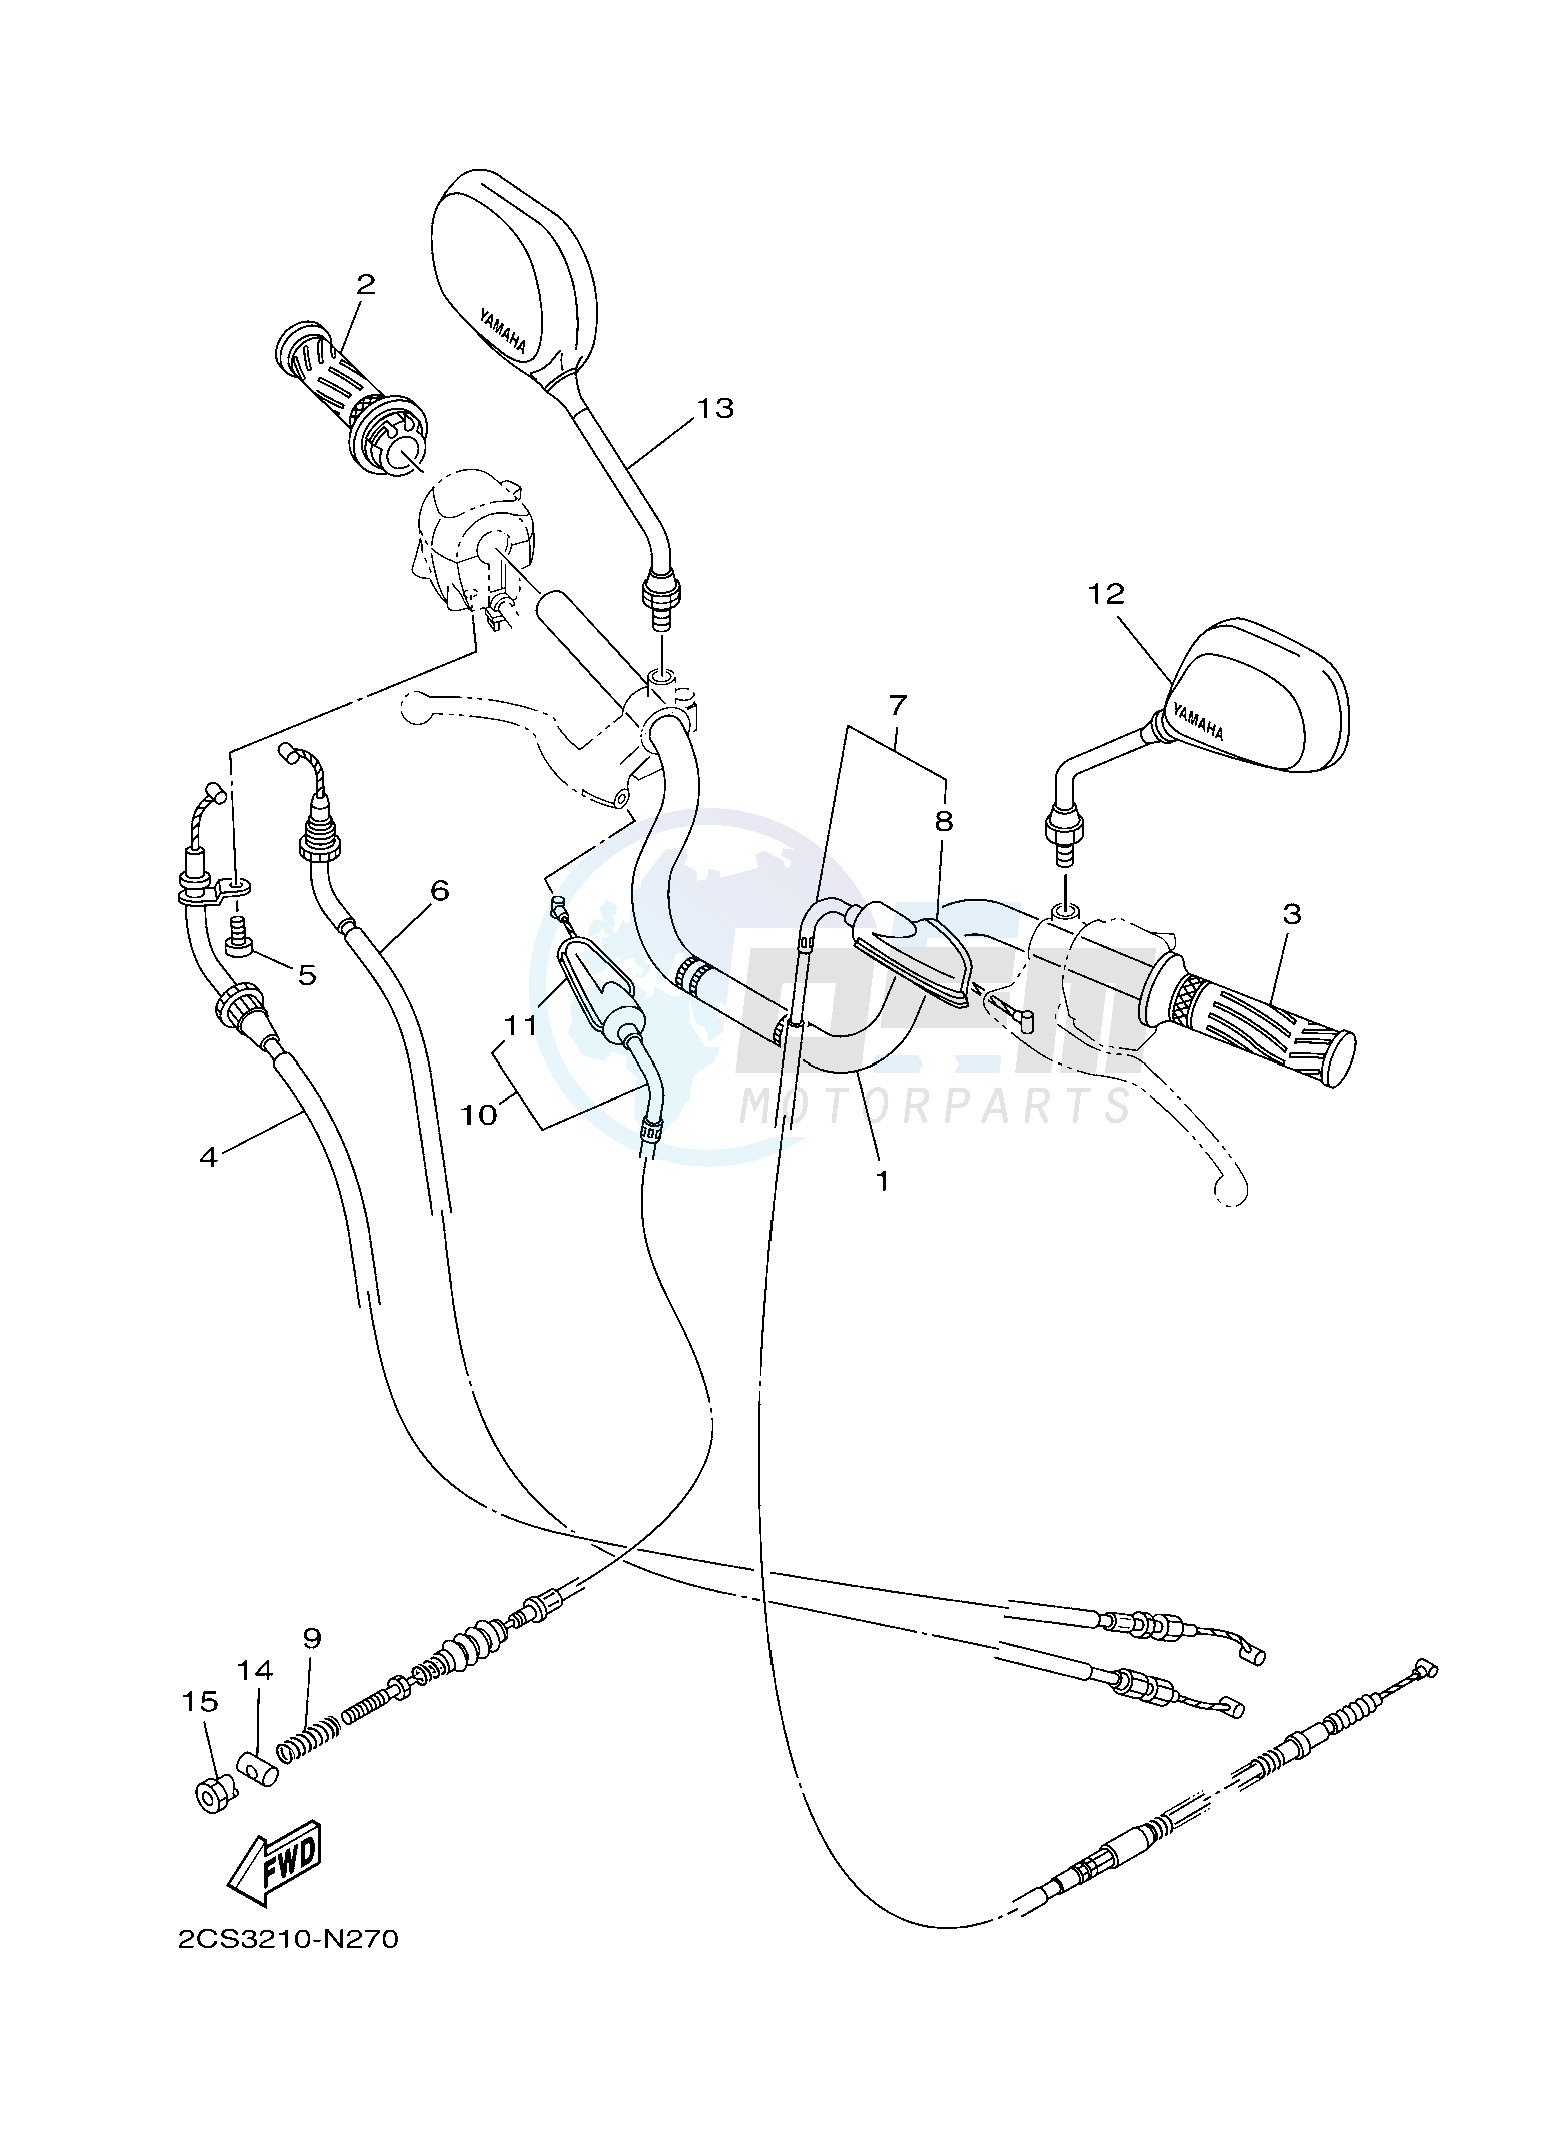 M. STEERING HANDLE & CABLE blueprint